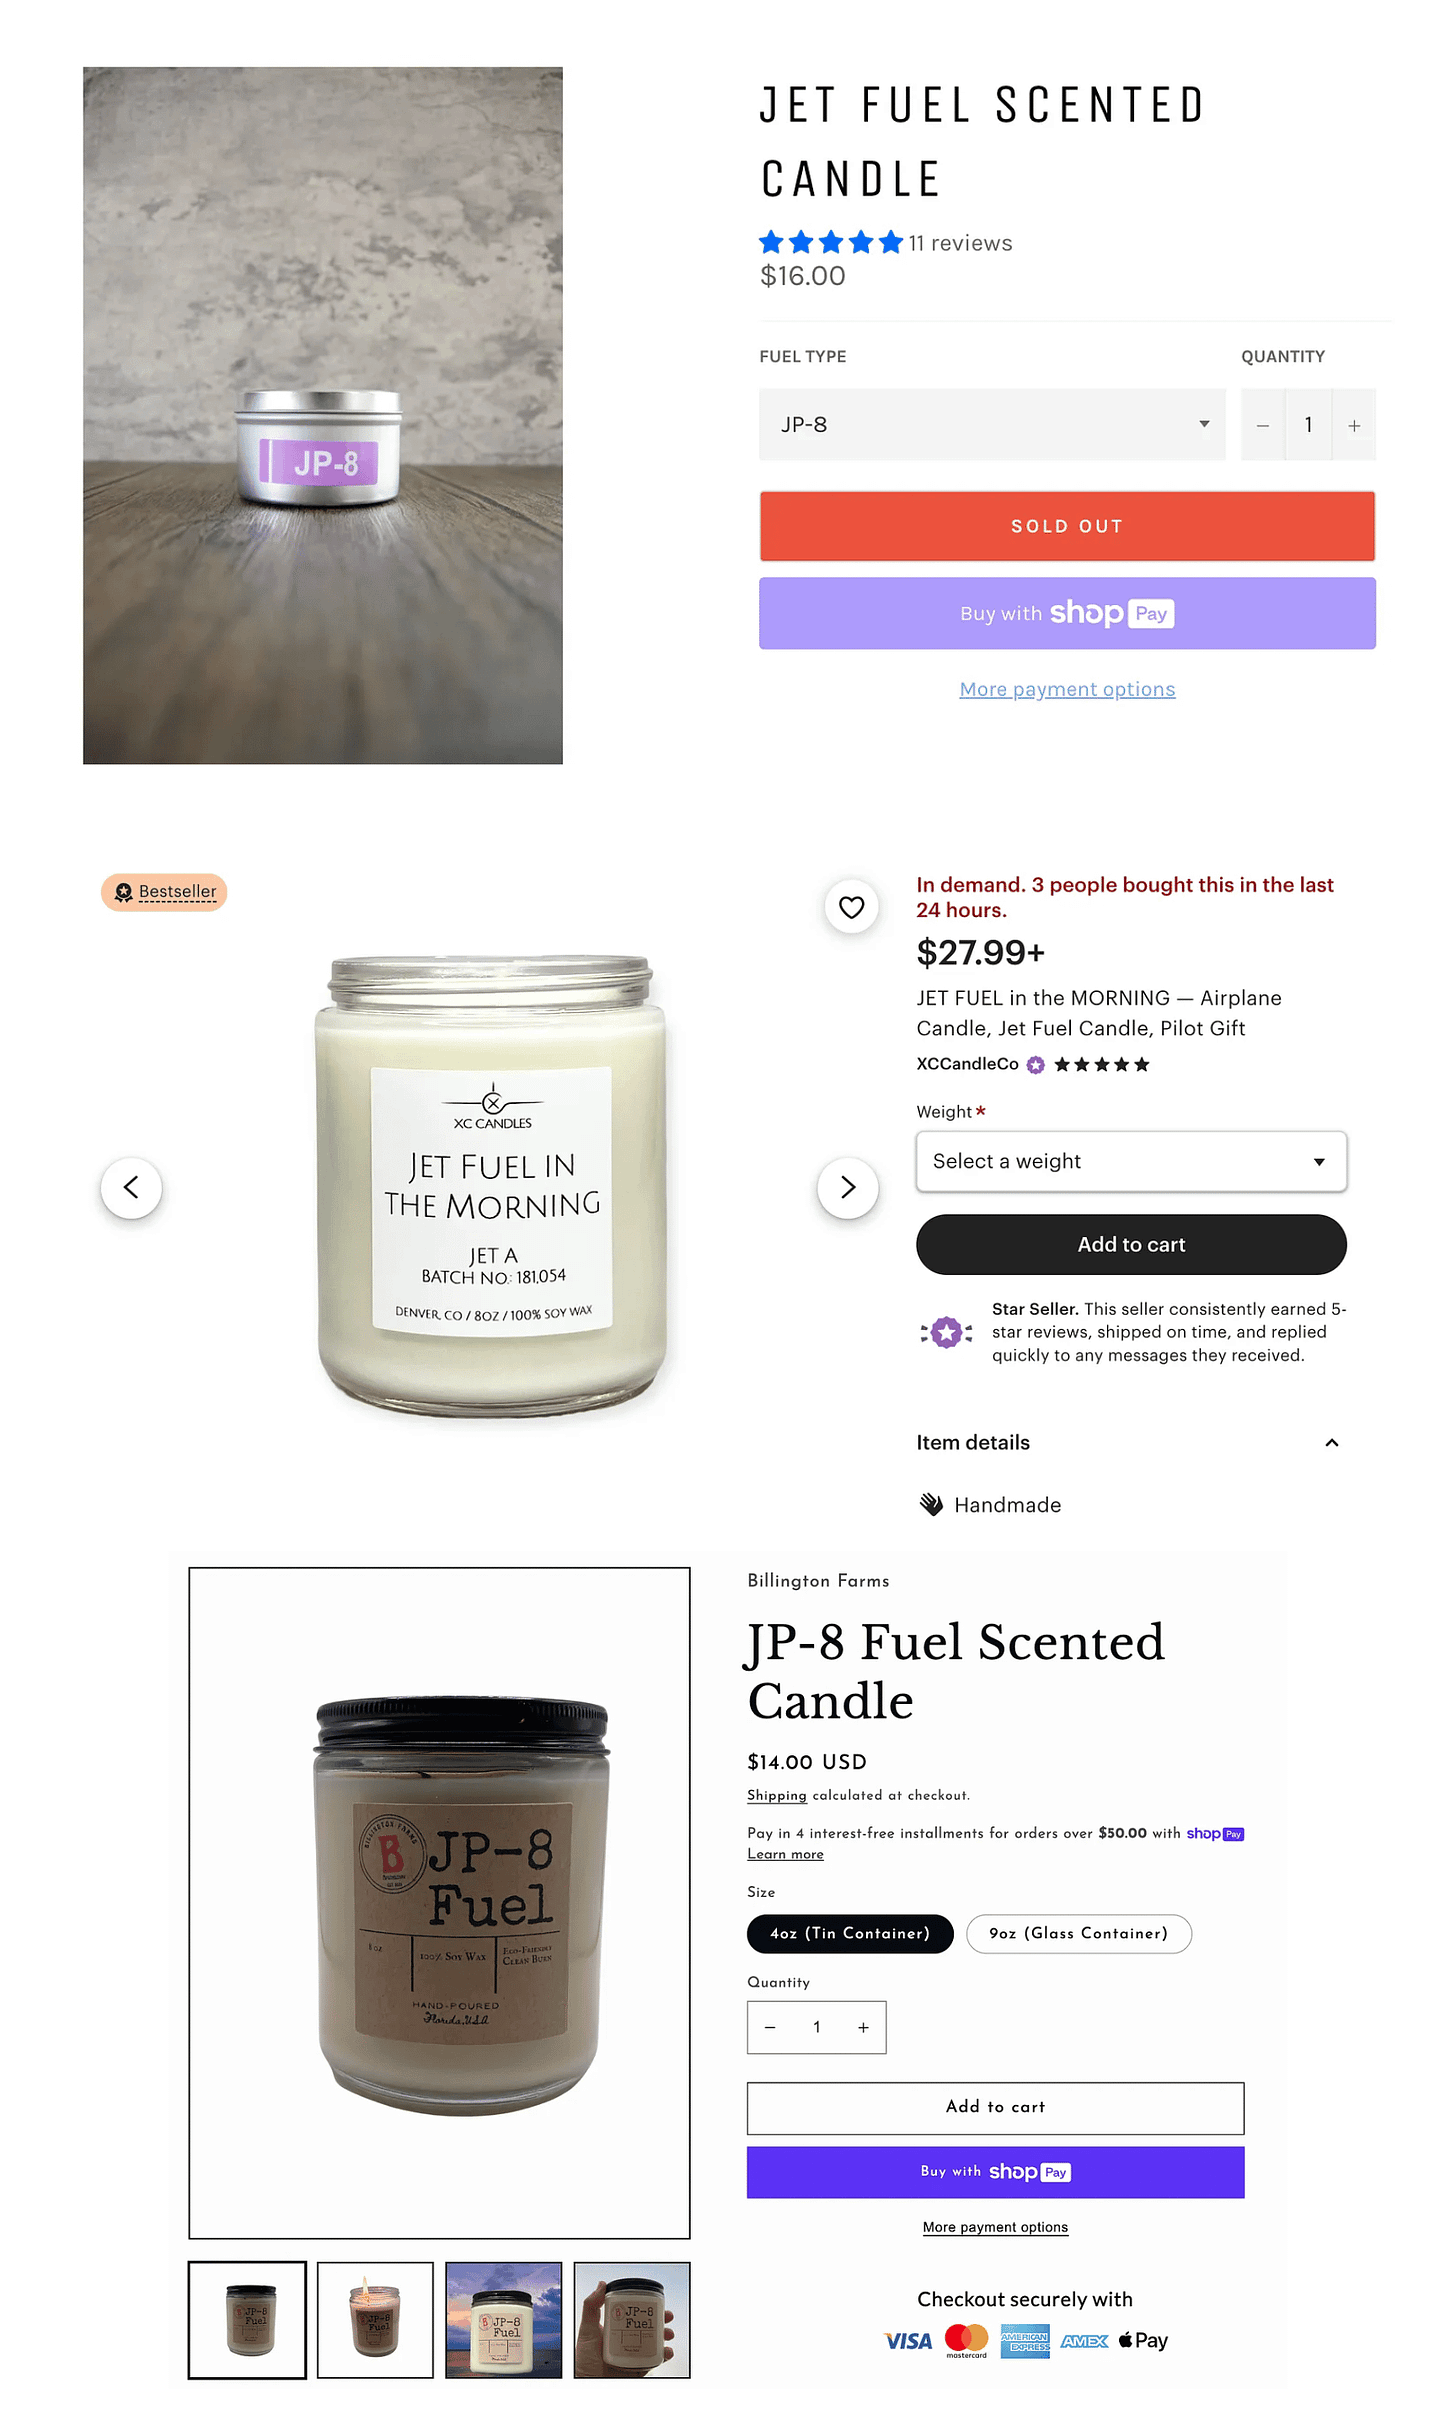 A collage of three different jet fuel scented candles, all from webpages with dropdown menus and buy buttons in various colors (red, purple, black)